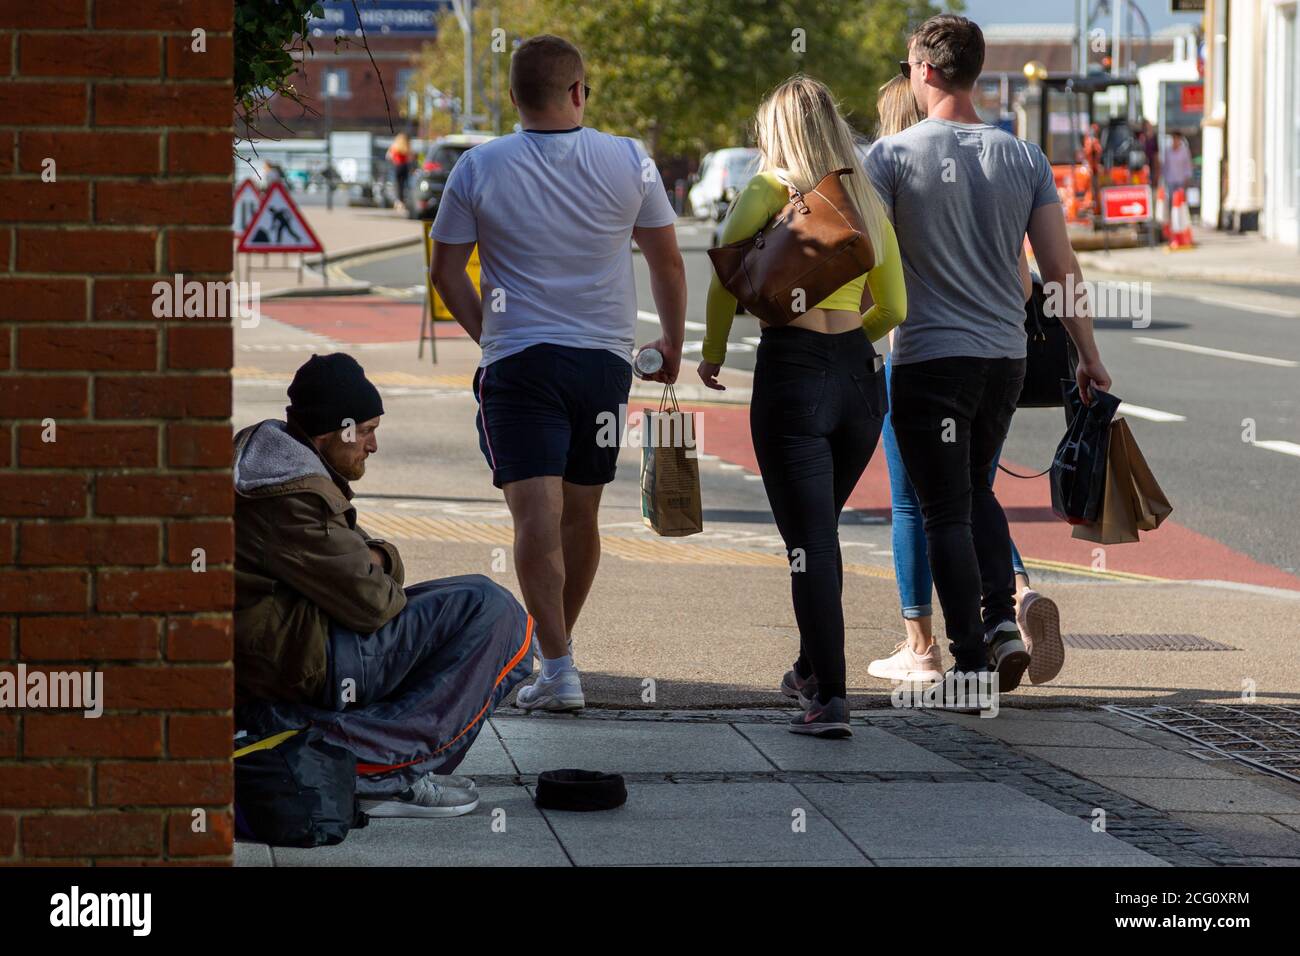 A group of young people walking past a homeless man begging in the street Stock Photo